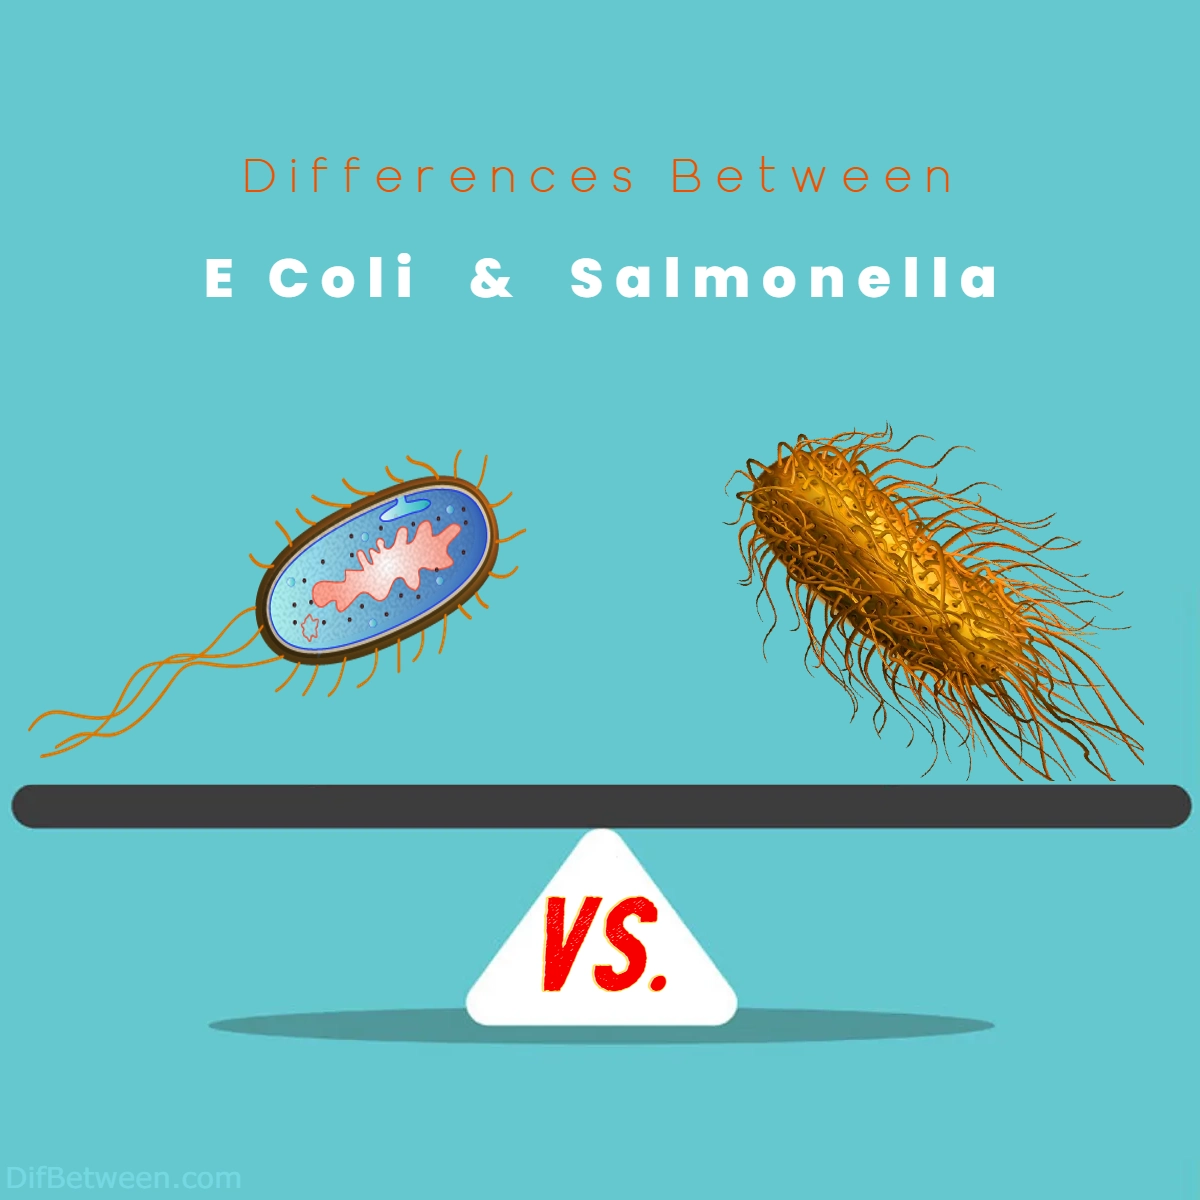 Difference Between E Coli and Salmonella